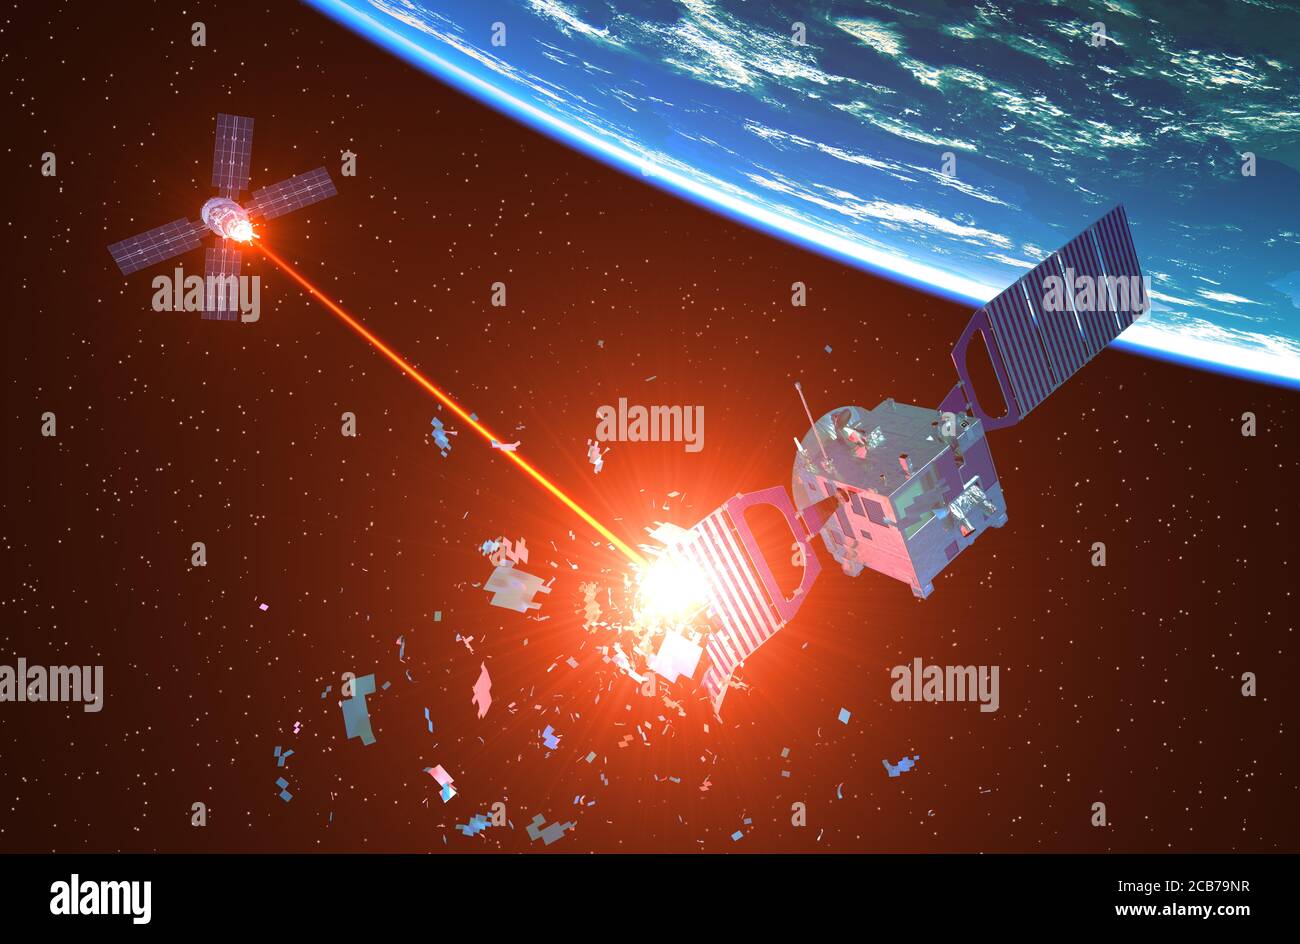 Military Spaceship Shoots Down An Enemy Satellite With A Laser Beam. 3D Illustration. Stock Photo